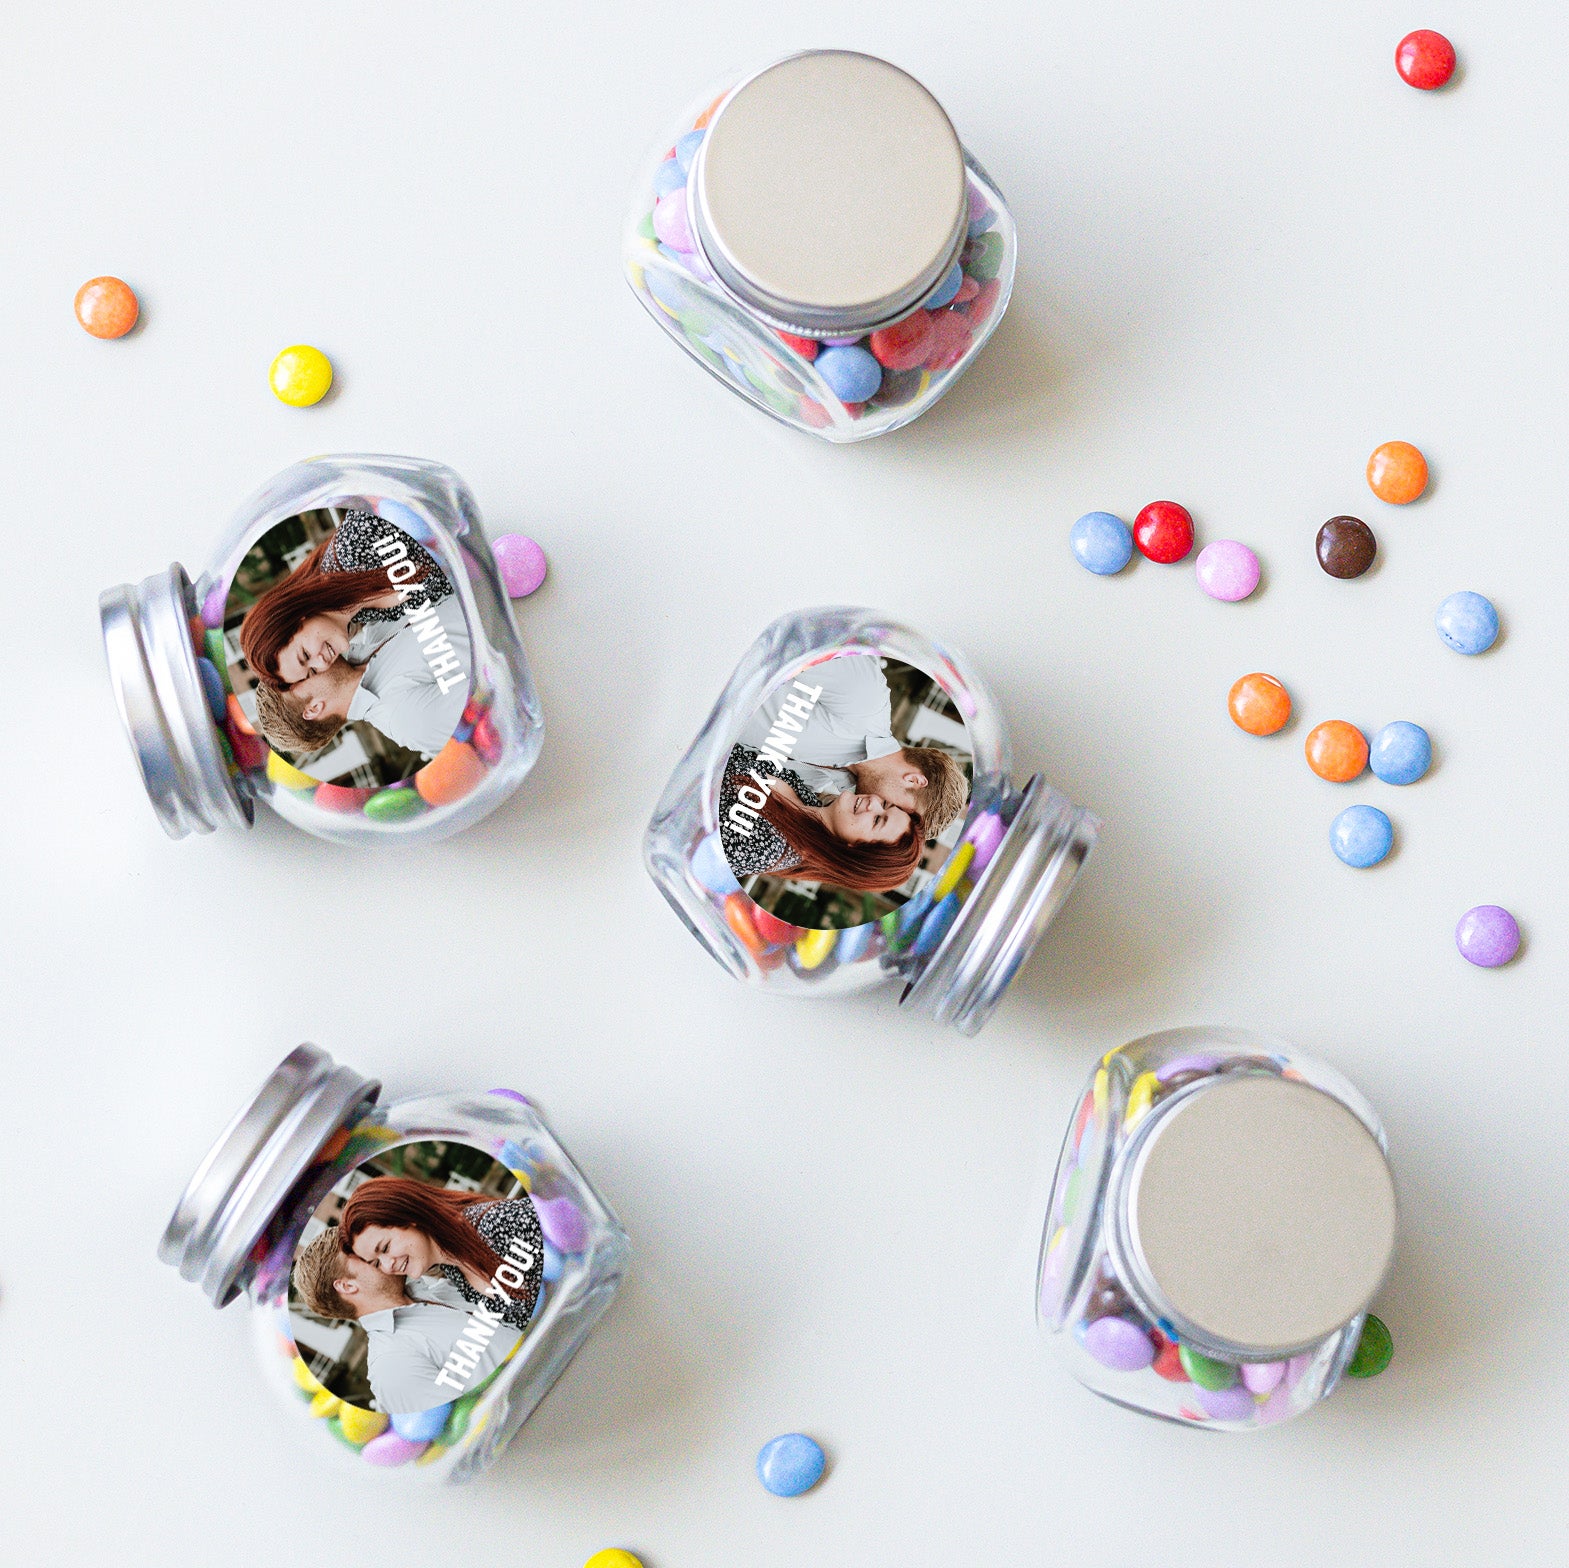 Personalised favours - Chocolates in jar - 20 pcs